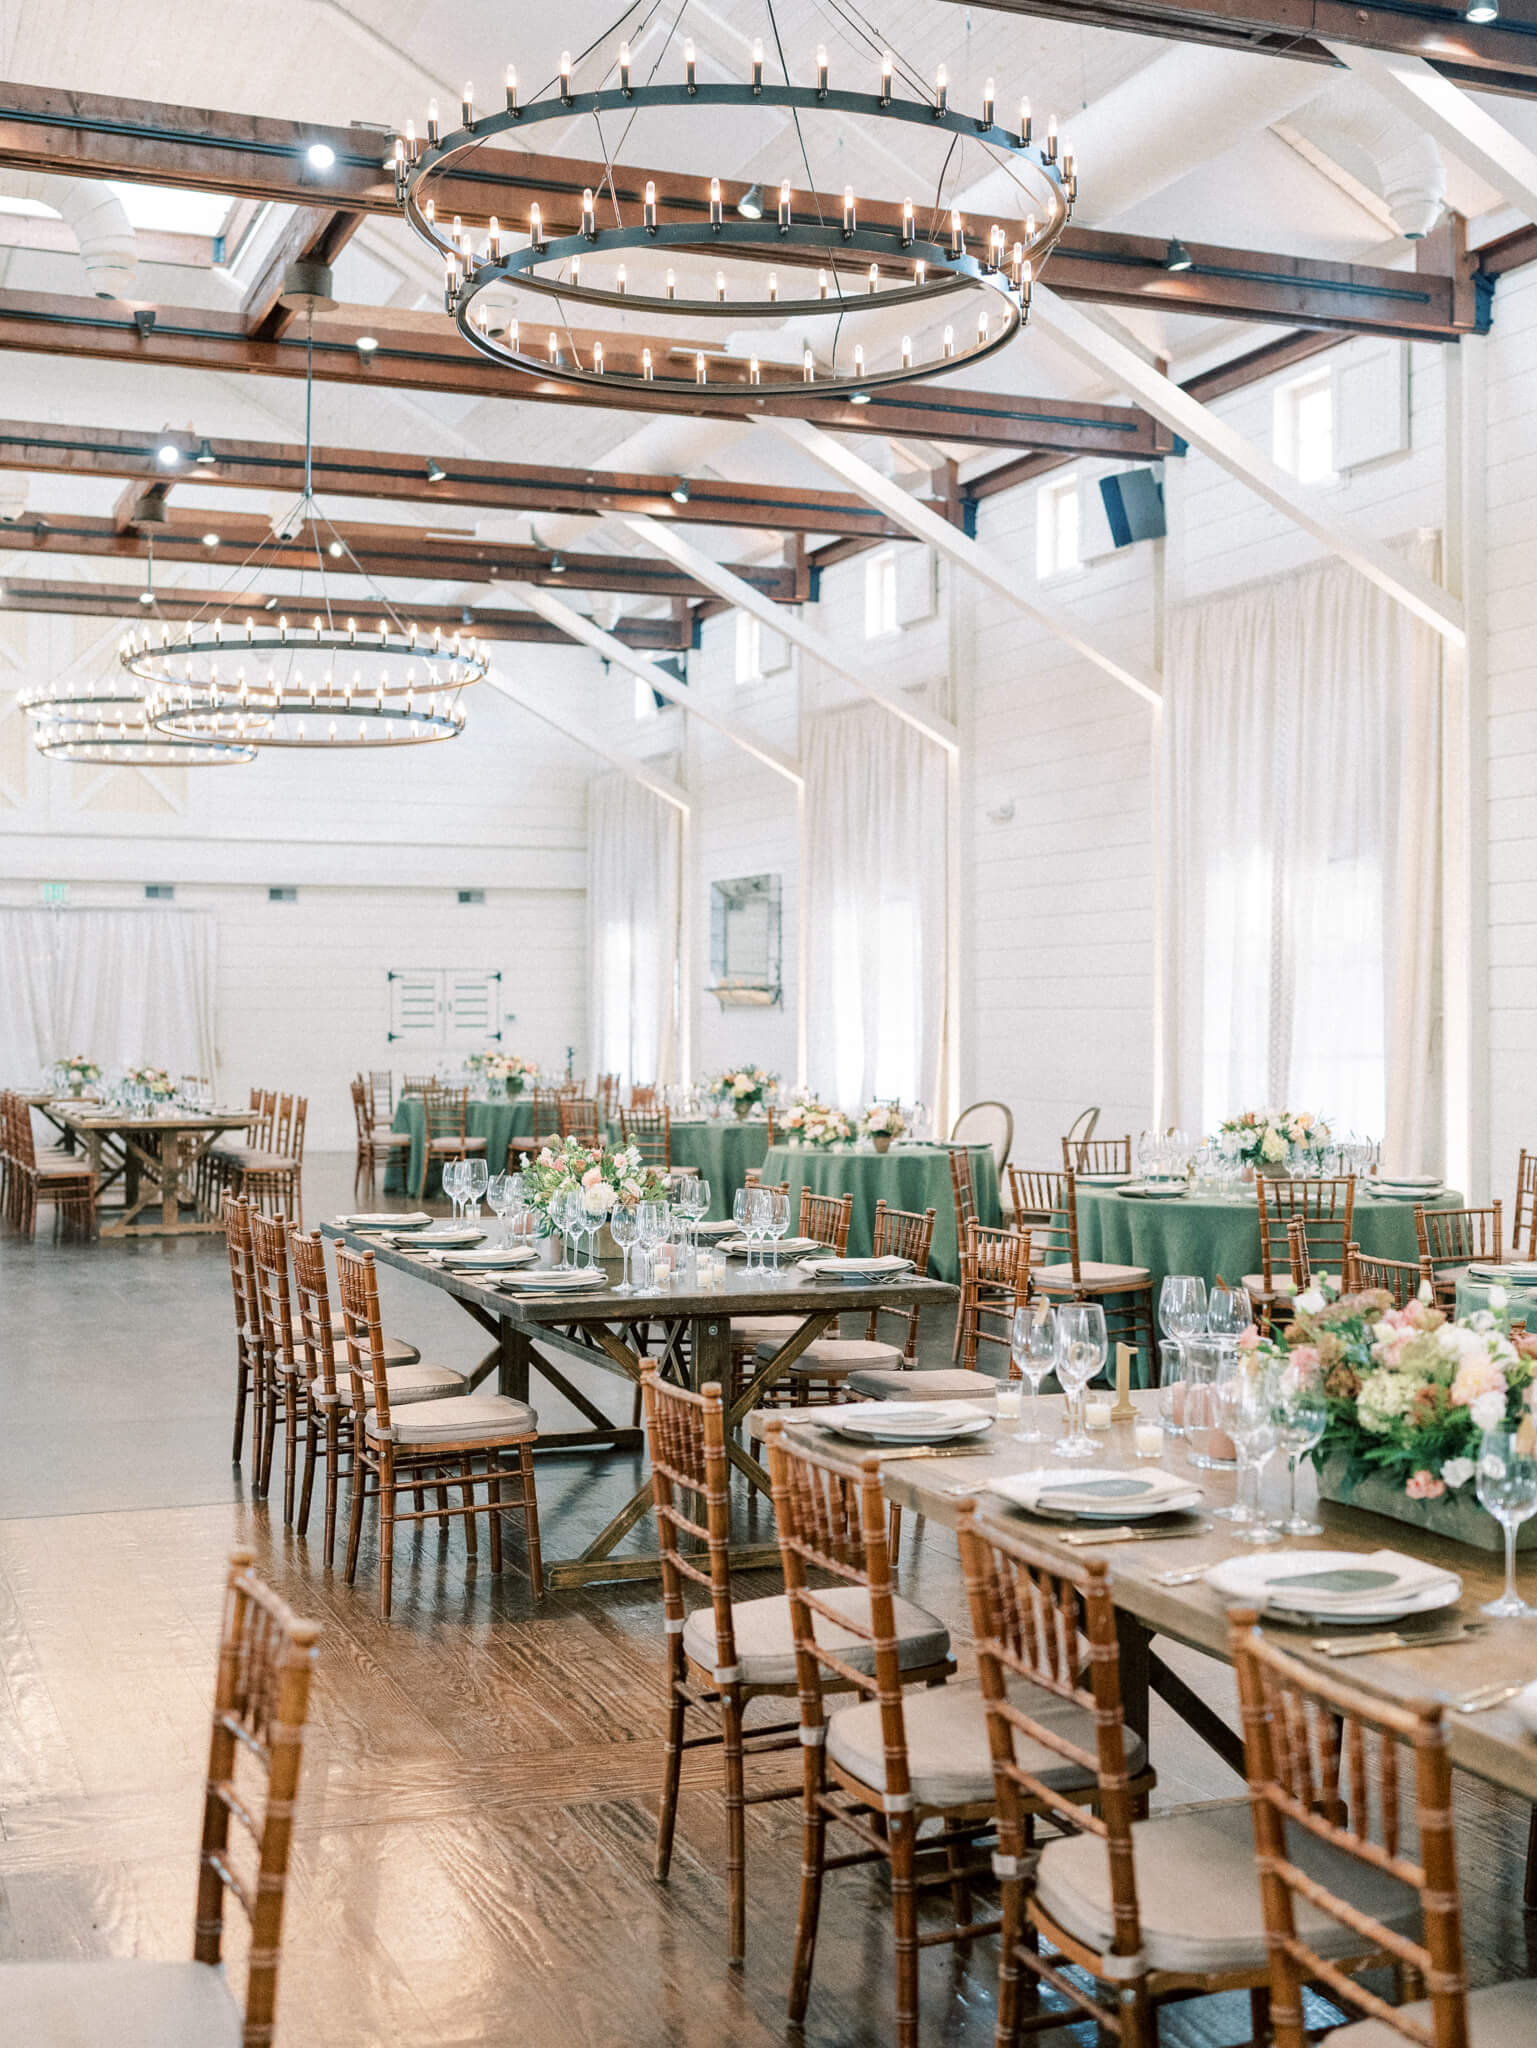 The Pippin Hill wedding reception space with wooden chairs and tables, green table cloths and peach and cream florals.